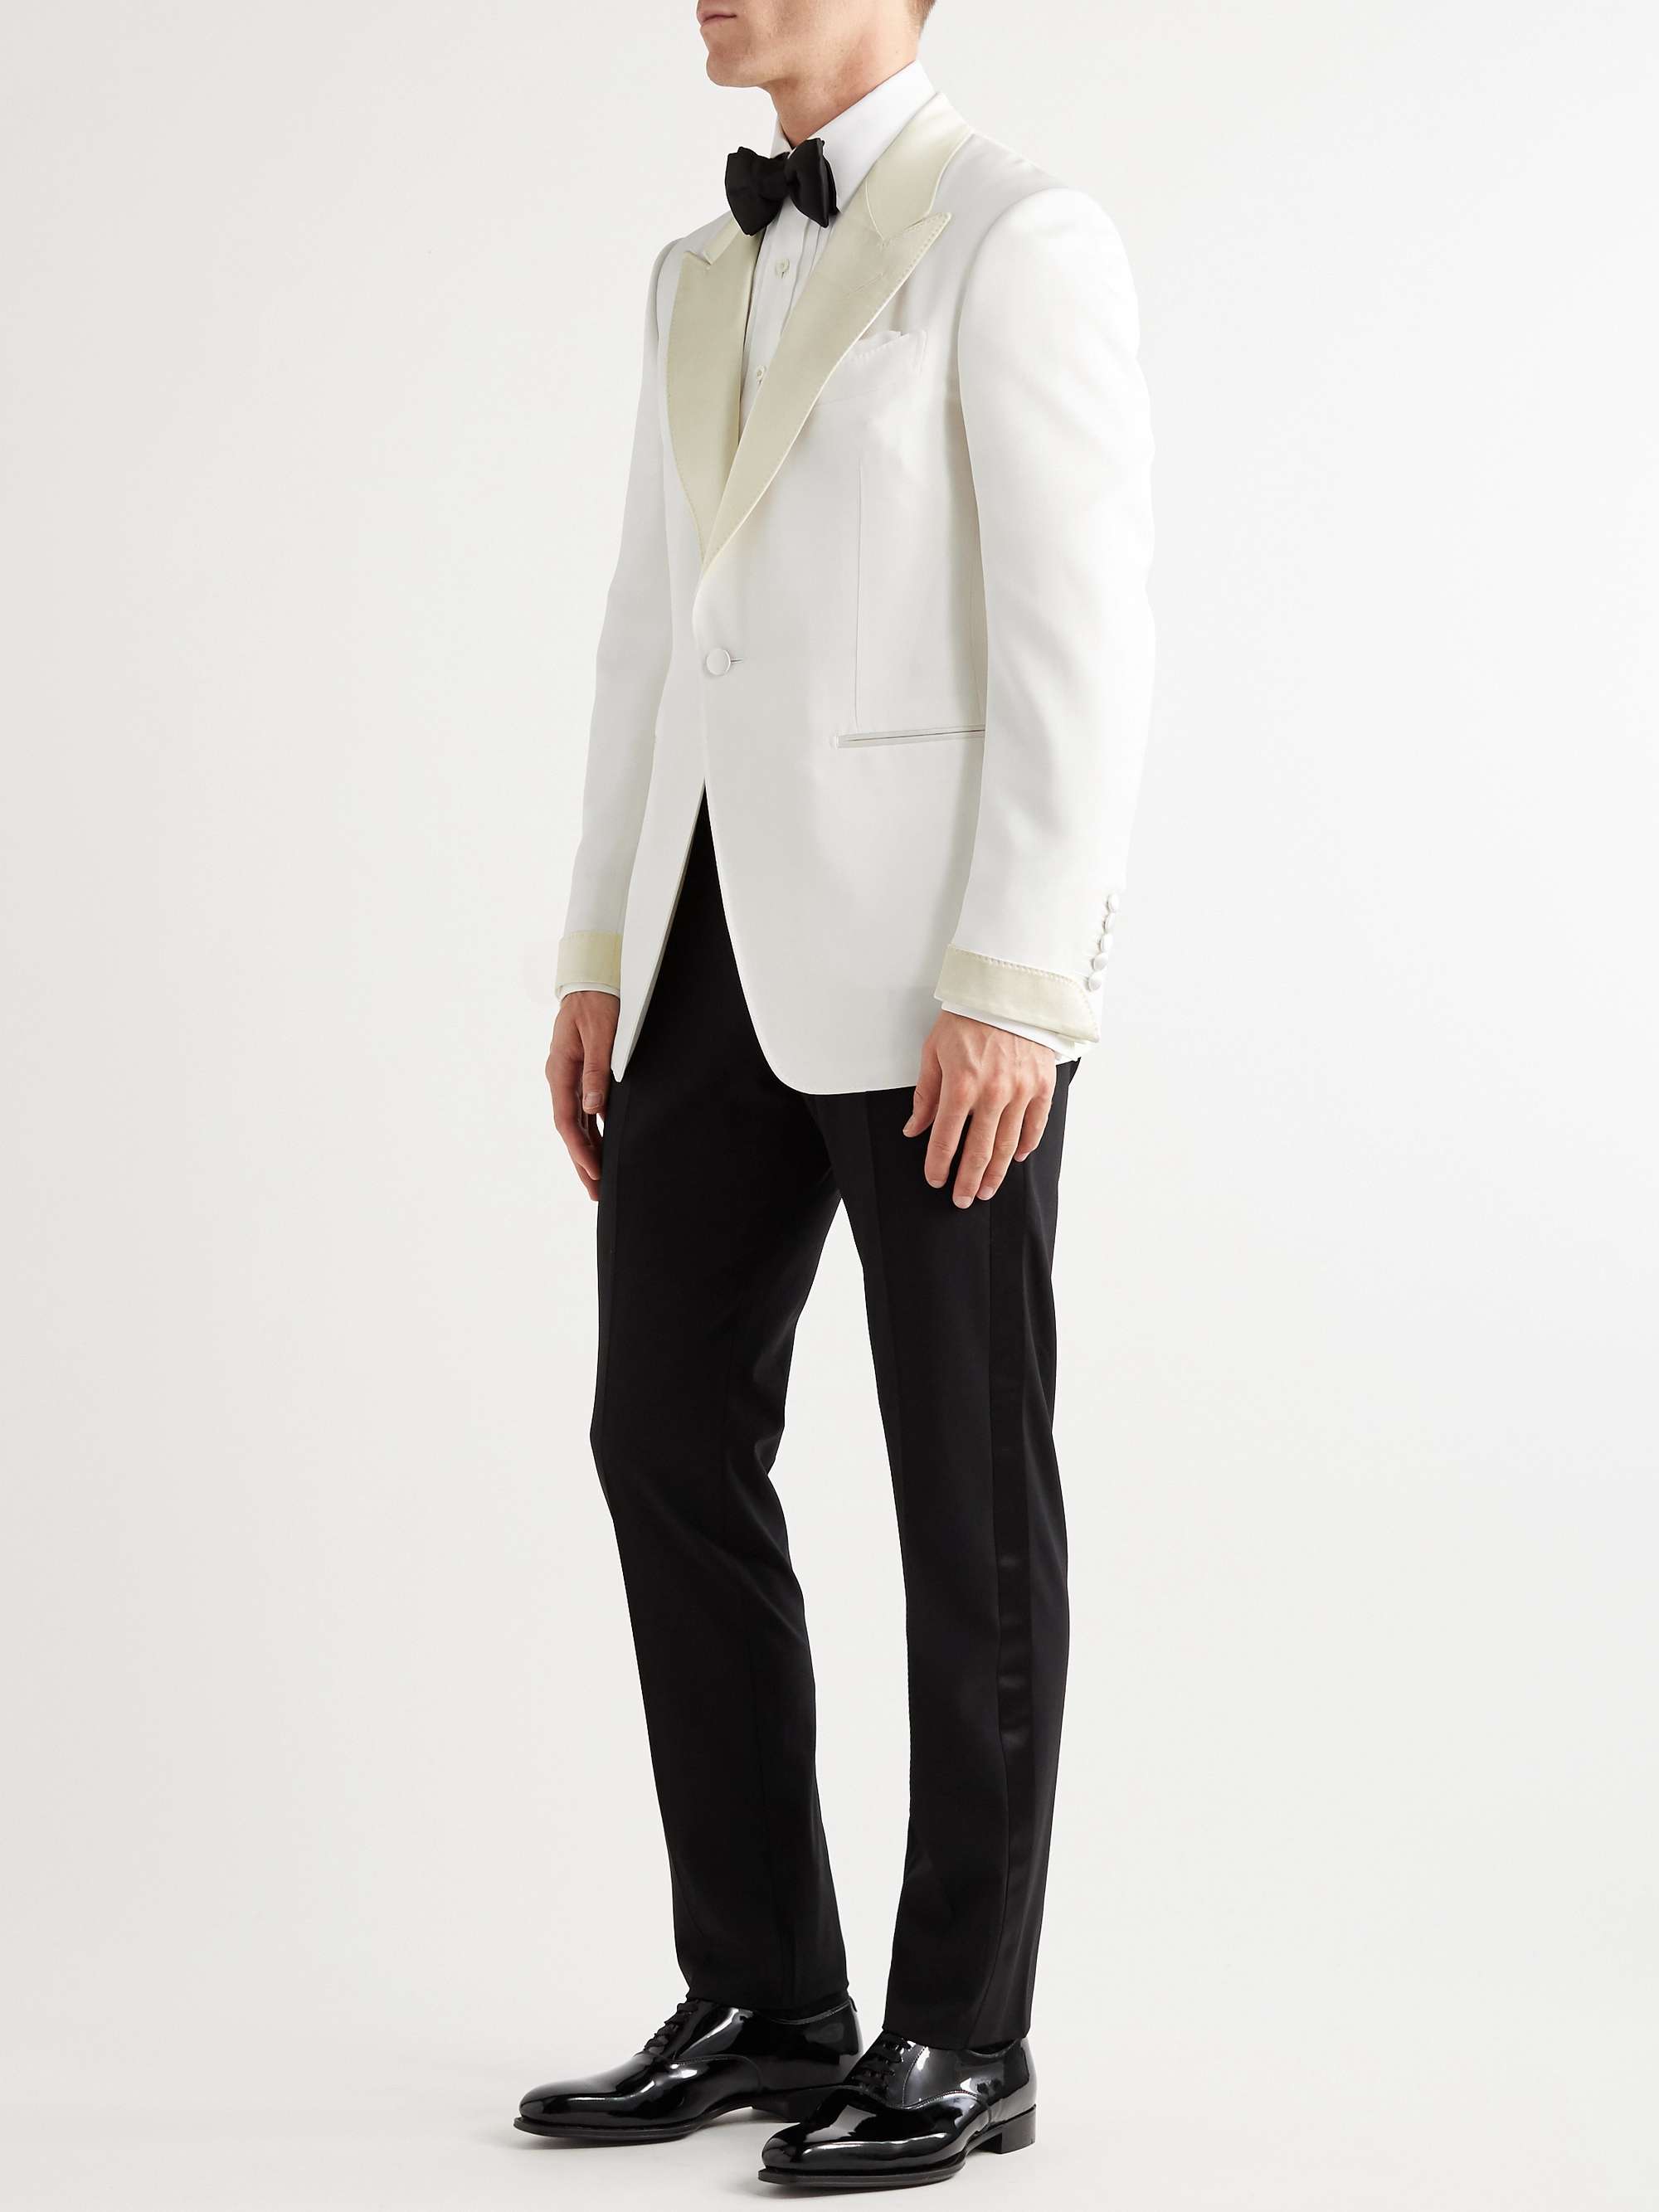 TOM FORD Slim-Fit Satin-Trimmed Wool and Mohair-Blend Tuxedo Jacket